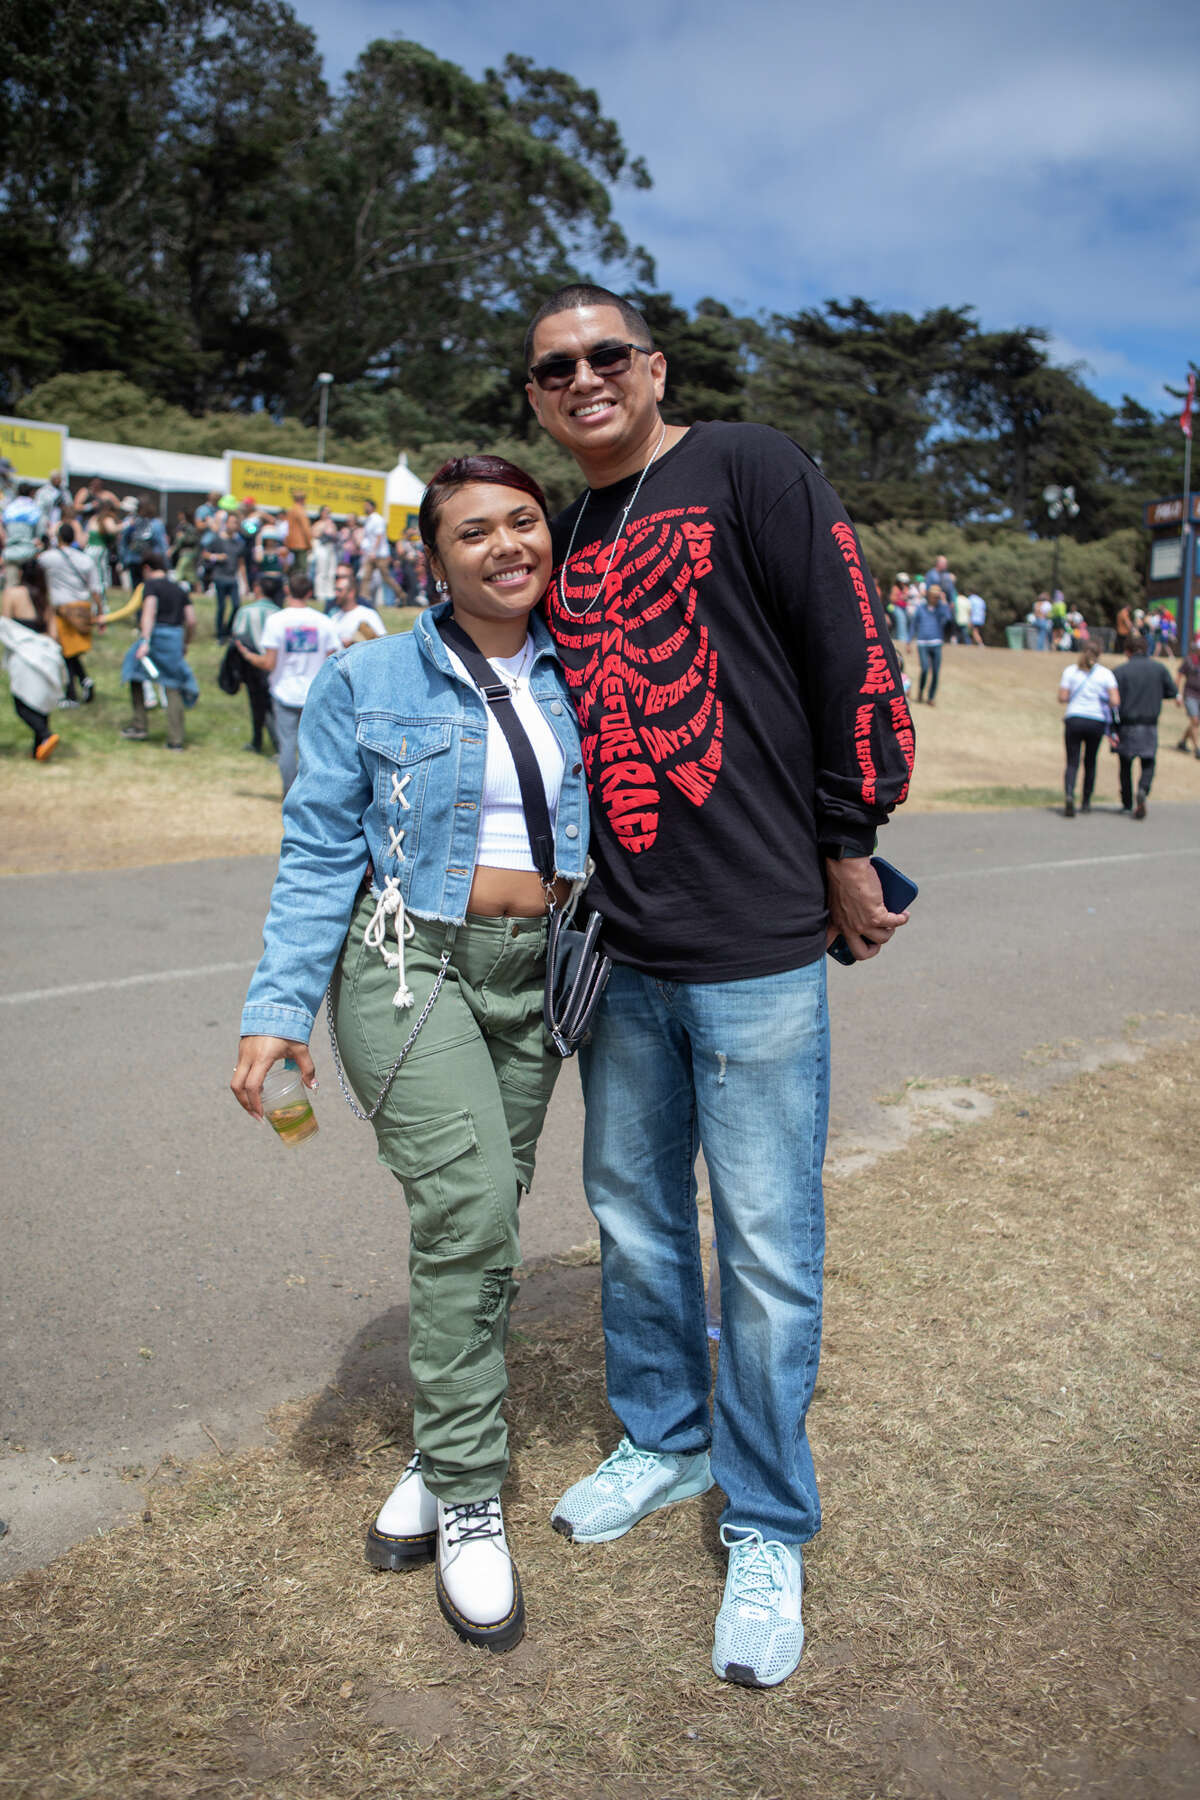 (Left to right) Ariana Arguijo and Adrian Jackson at Outside Lands in Golden Gate Park, San Francisco, CA on August 6, 2022.